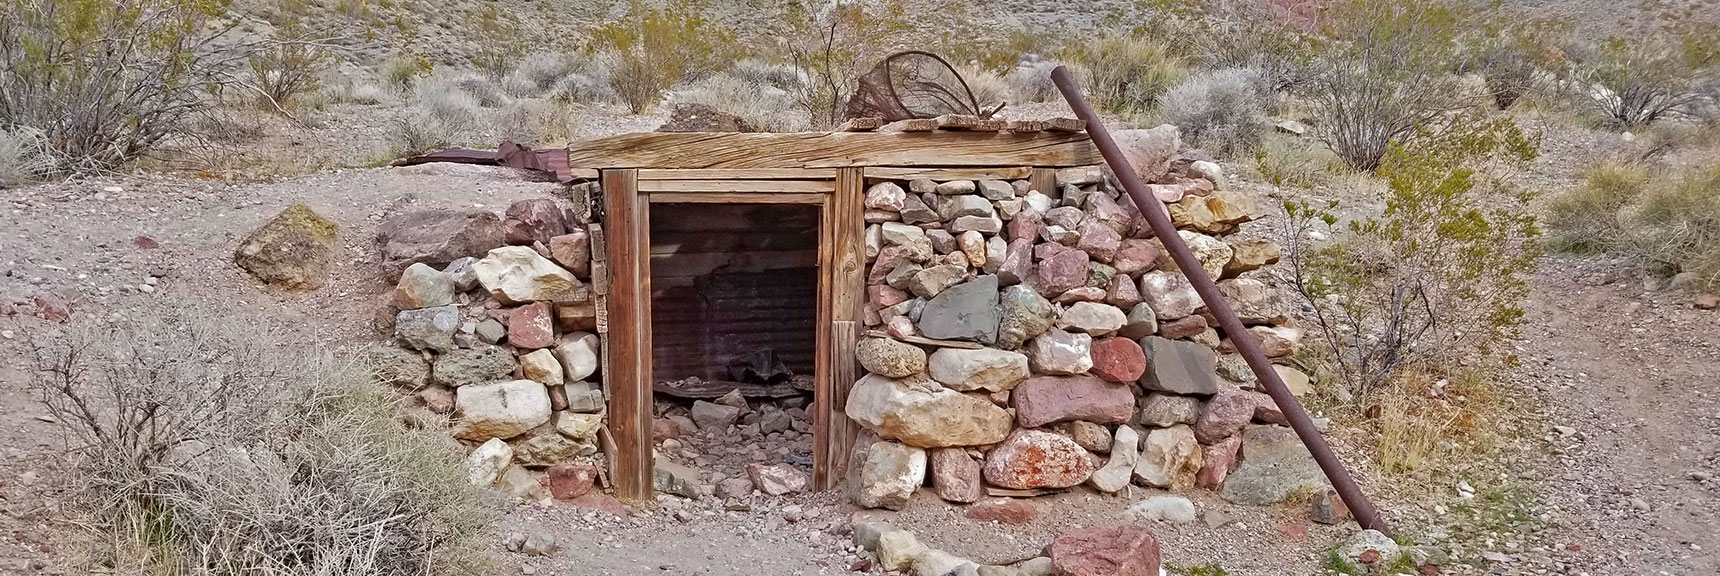 Storage Area or Miner's Cabin in Leadfield? | Titus Canyon Grand Loop by Mountain Bike | Death Valley National Park, California